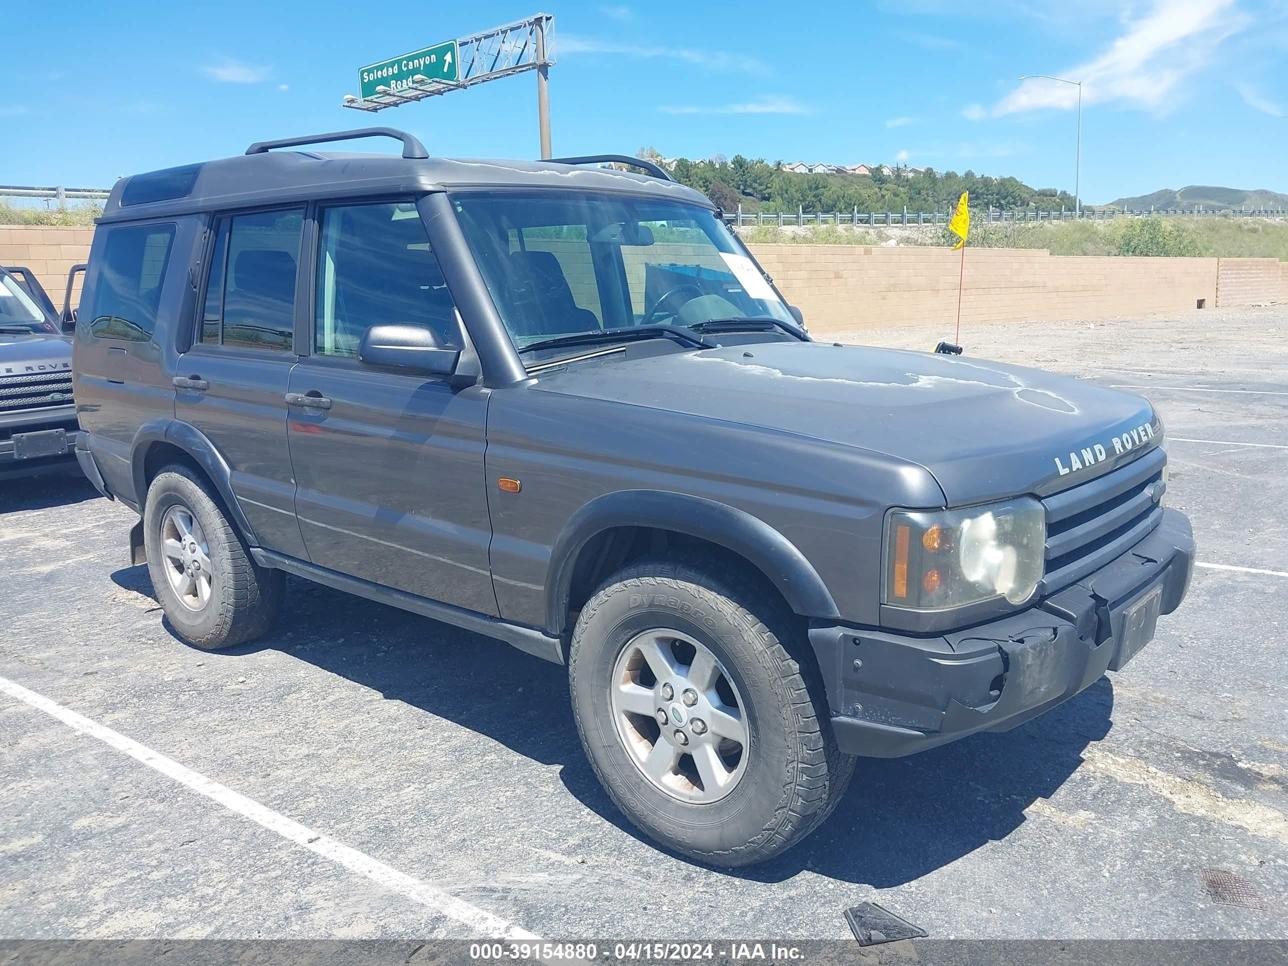 VIN: SALTL16493A820105 - land rover discovery